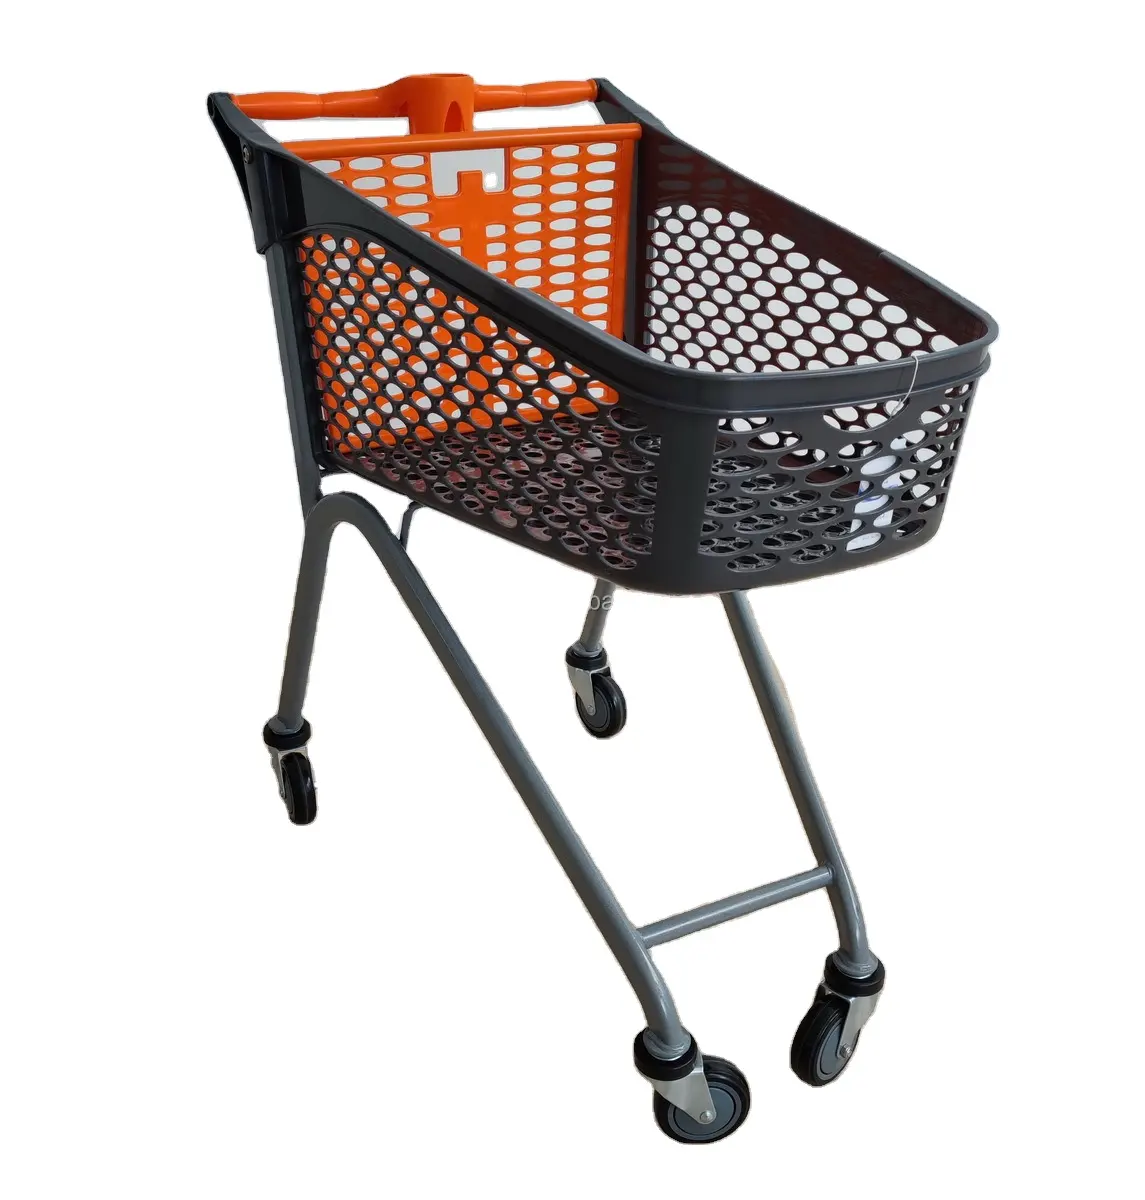 100L Euro Style supermarket plastic shopping trolley cart with cup holder